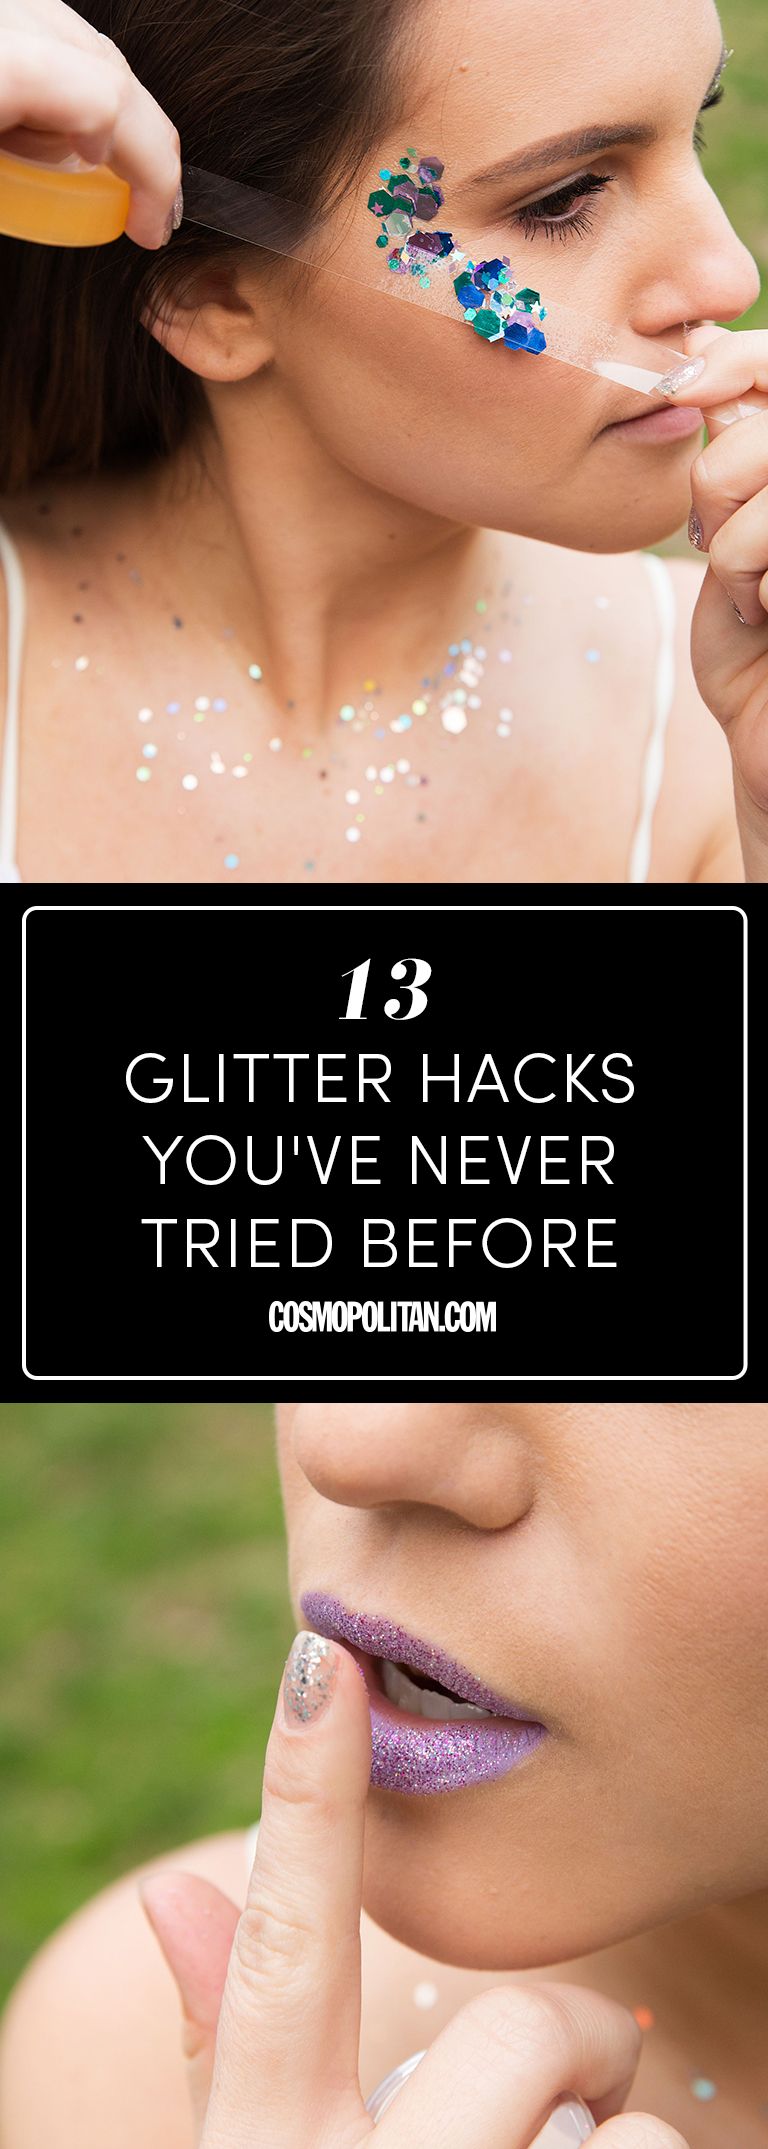 How to Wear Glitter on Your Face